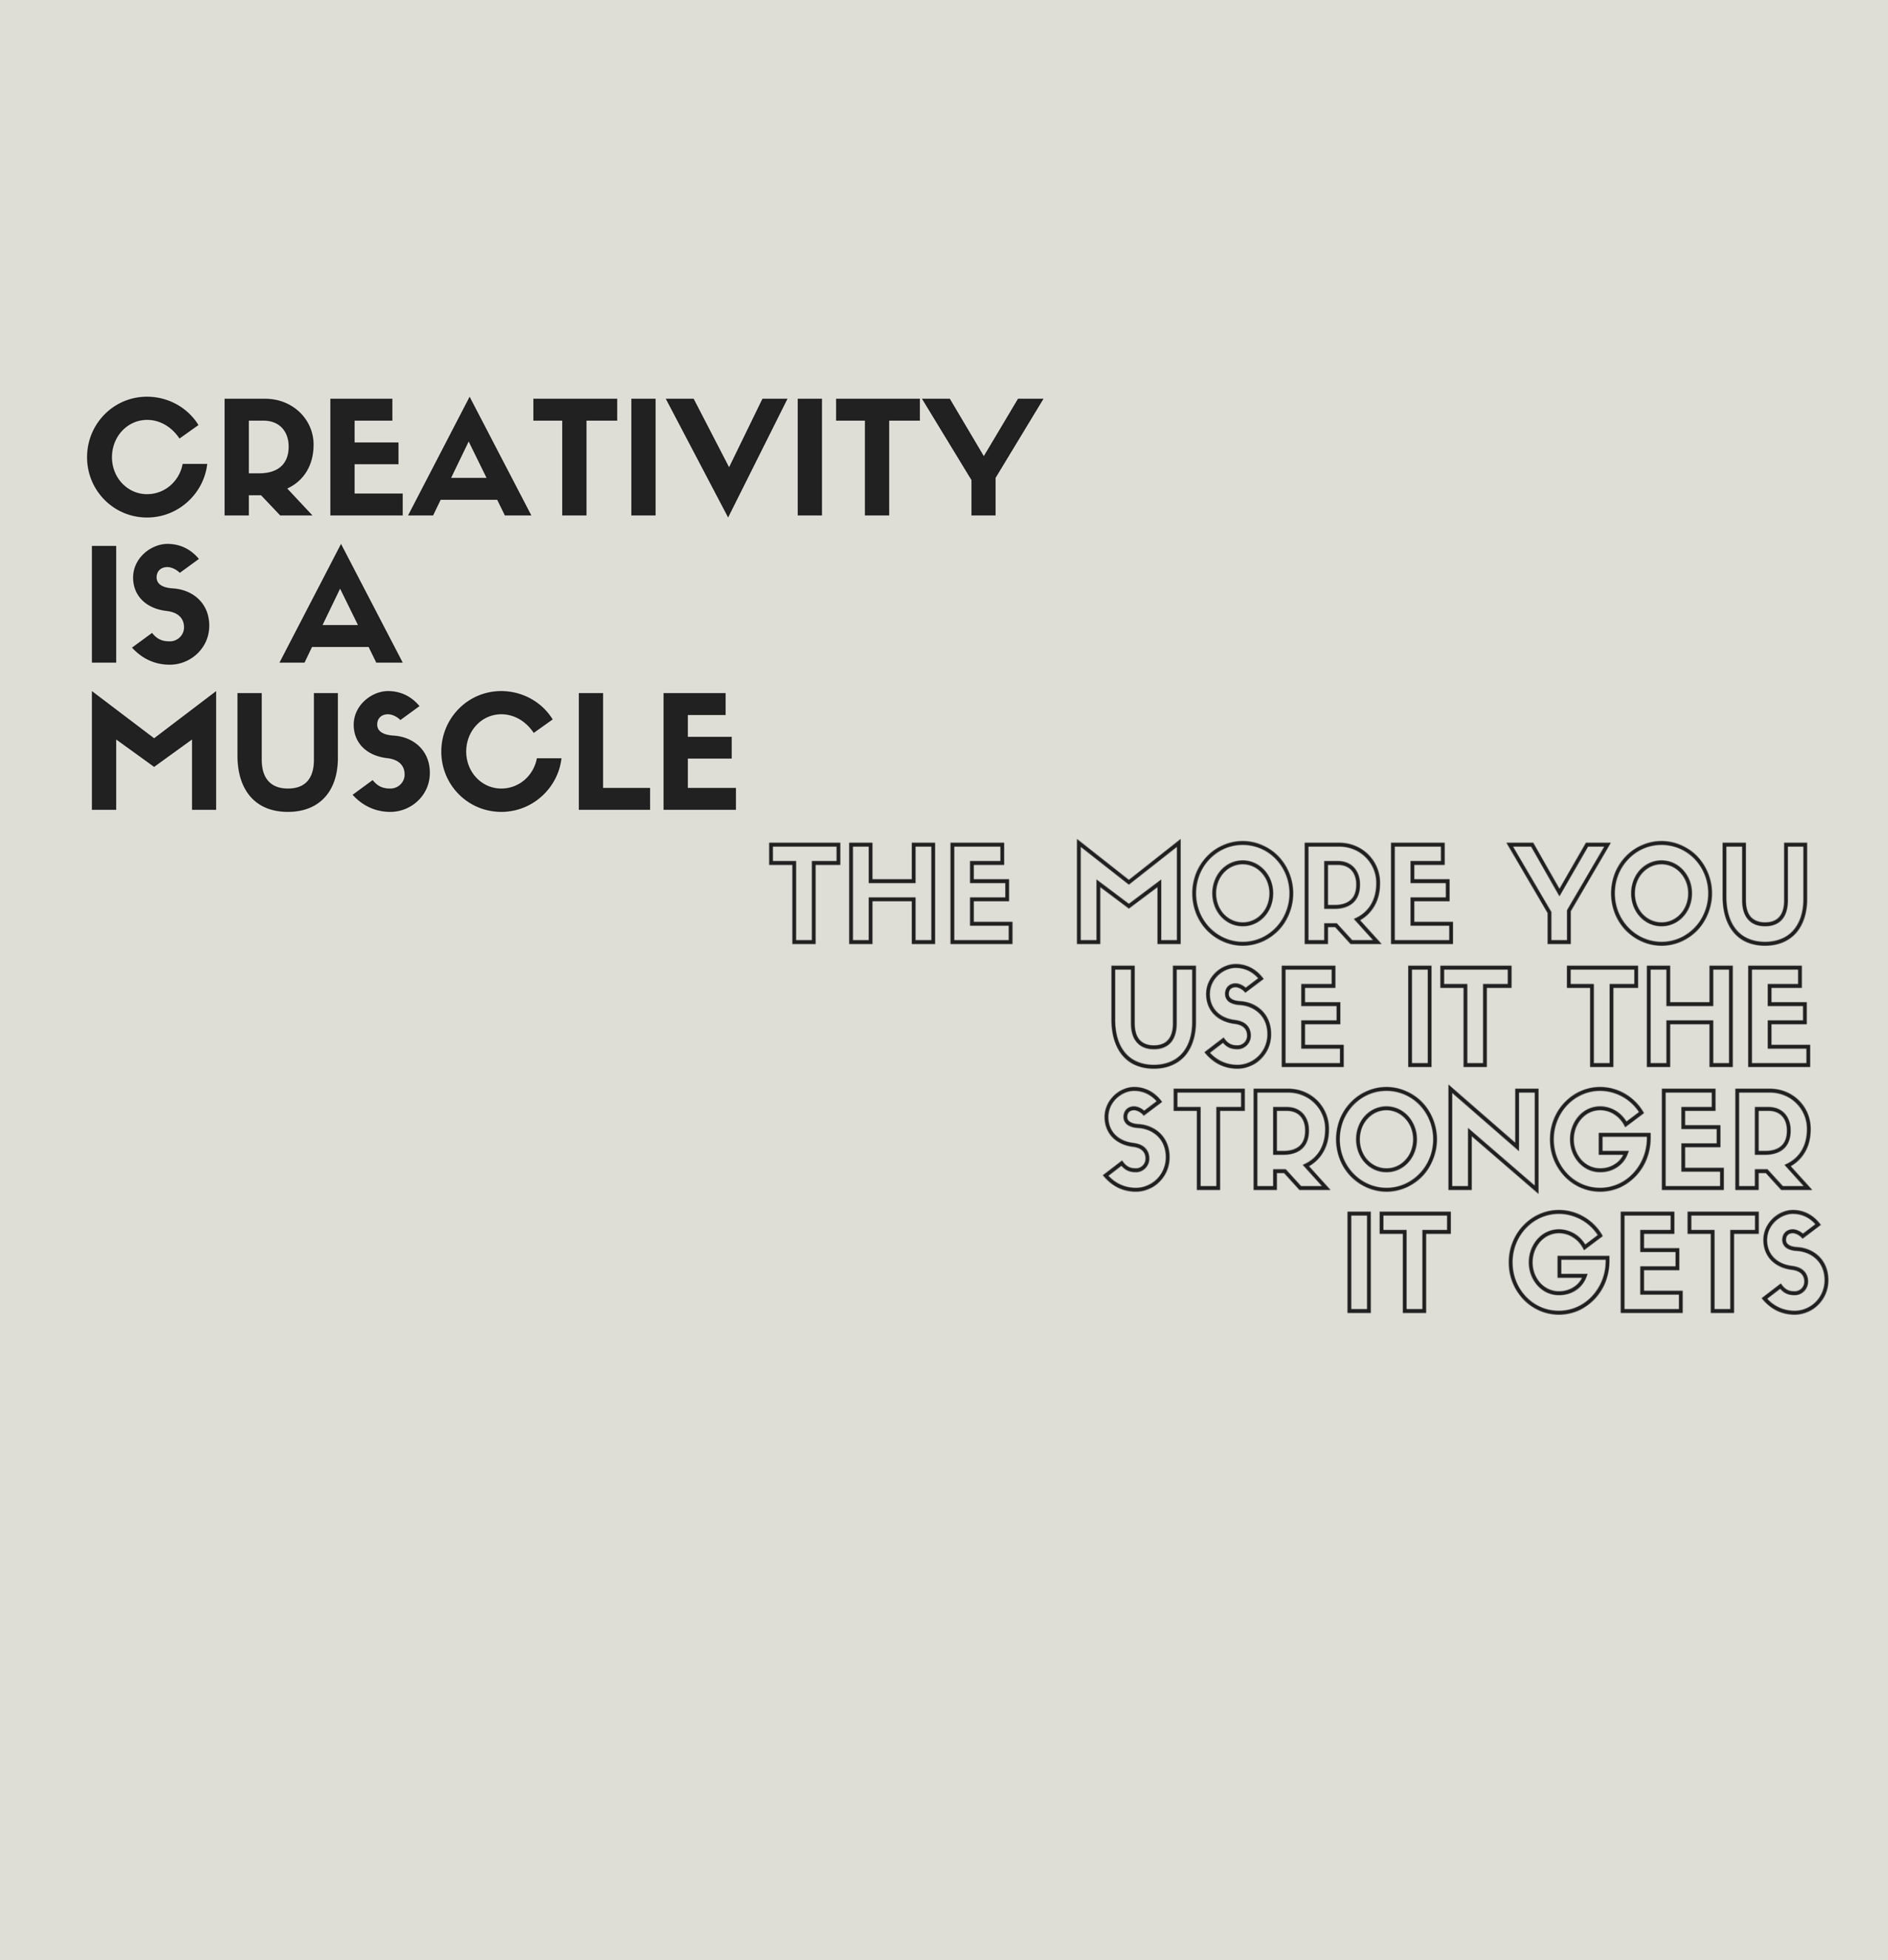 Creativity is a muscle, exercise it